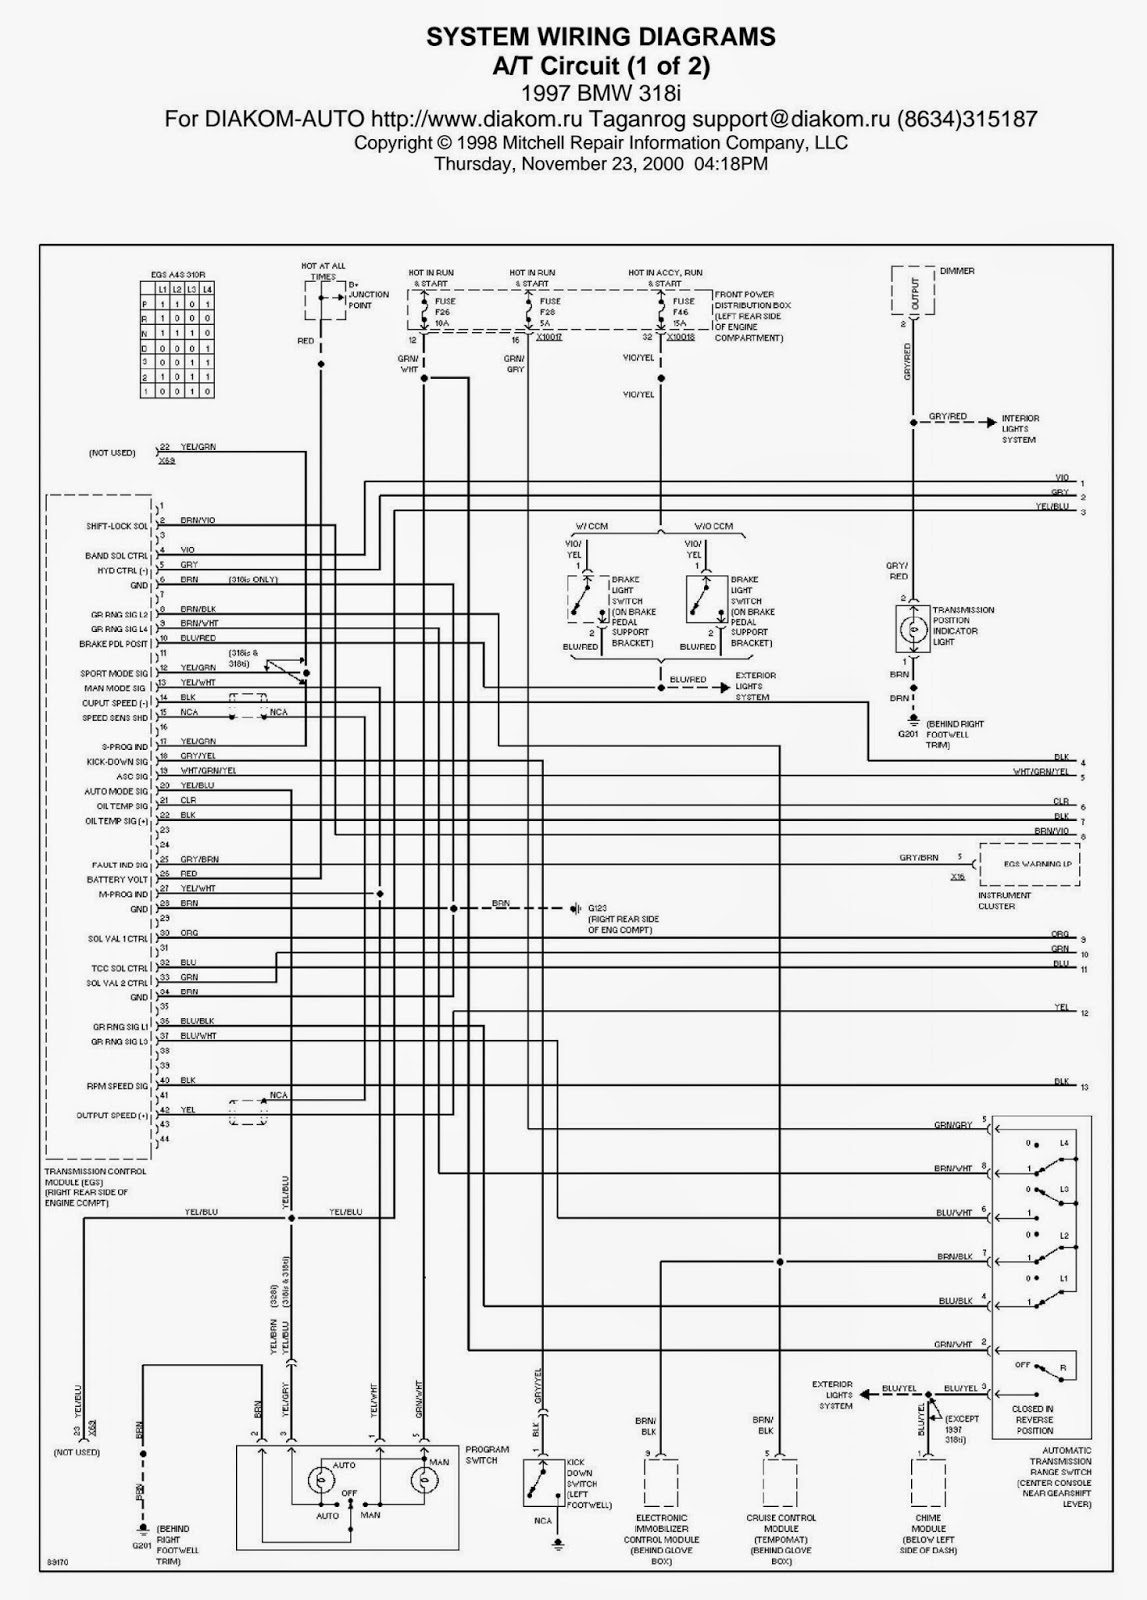 Wiring Diagrams And Free Manual Ebooks  1997 Bmw 318i